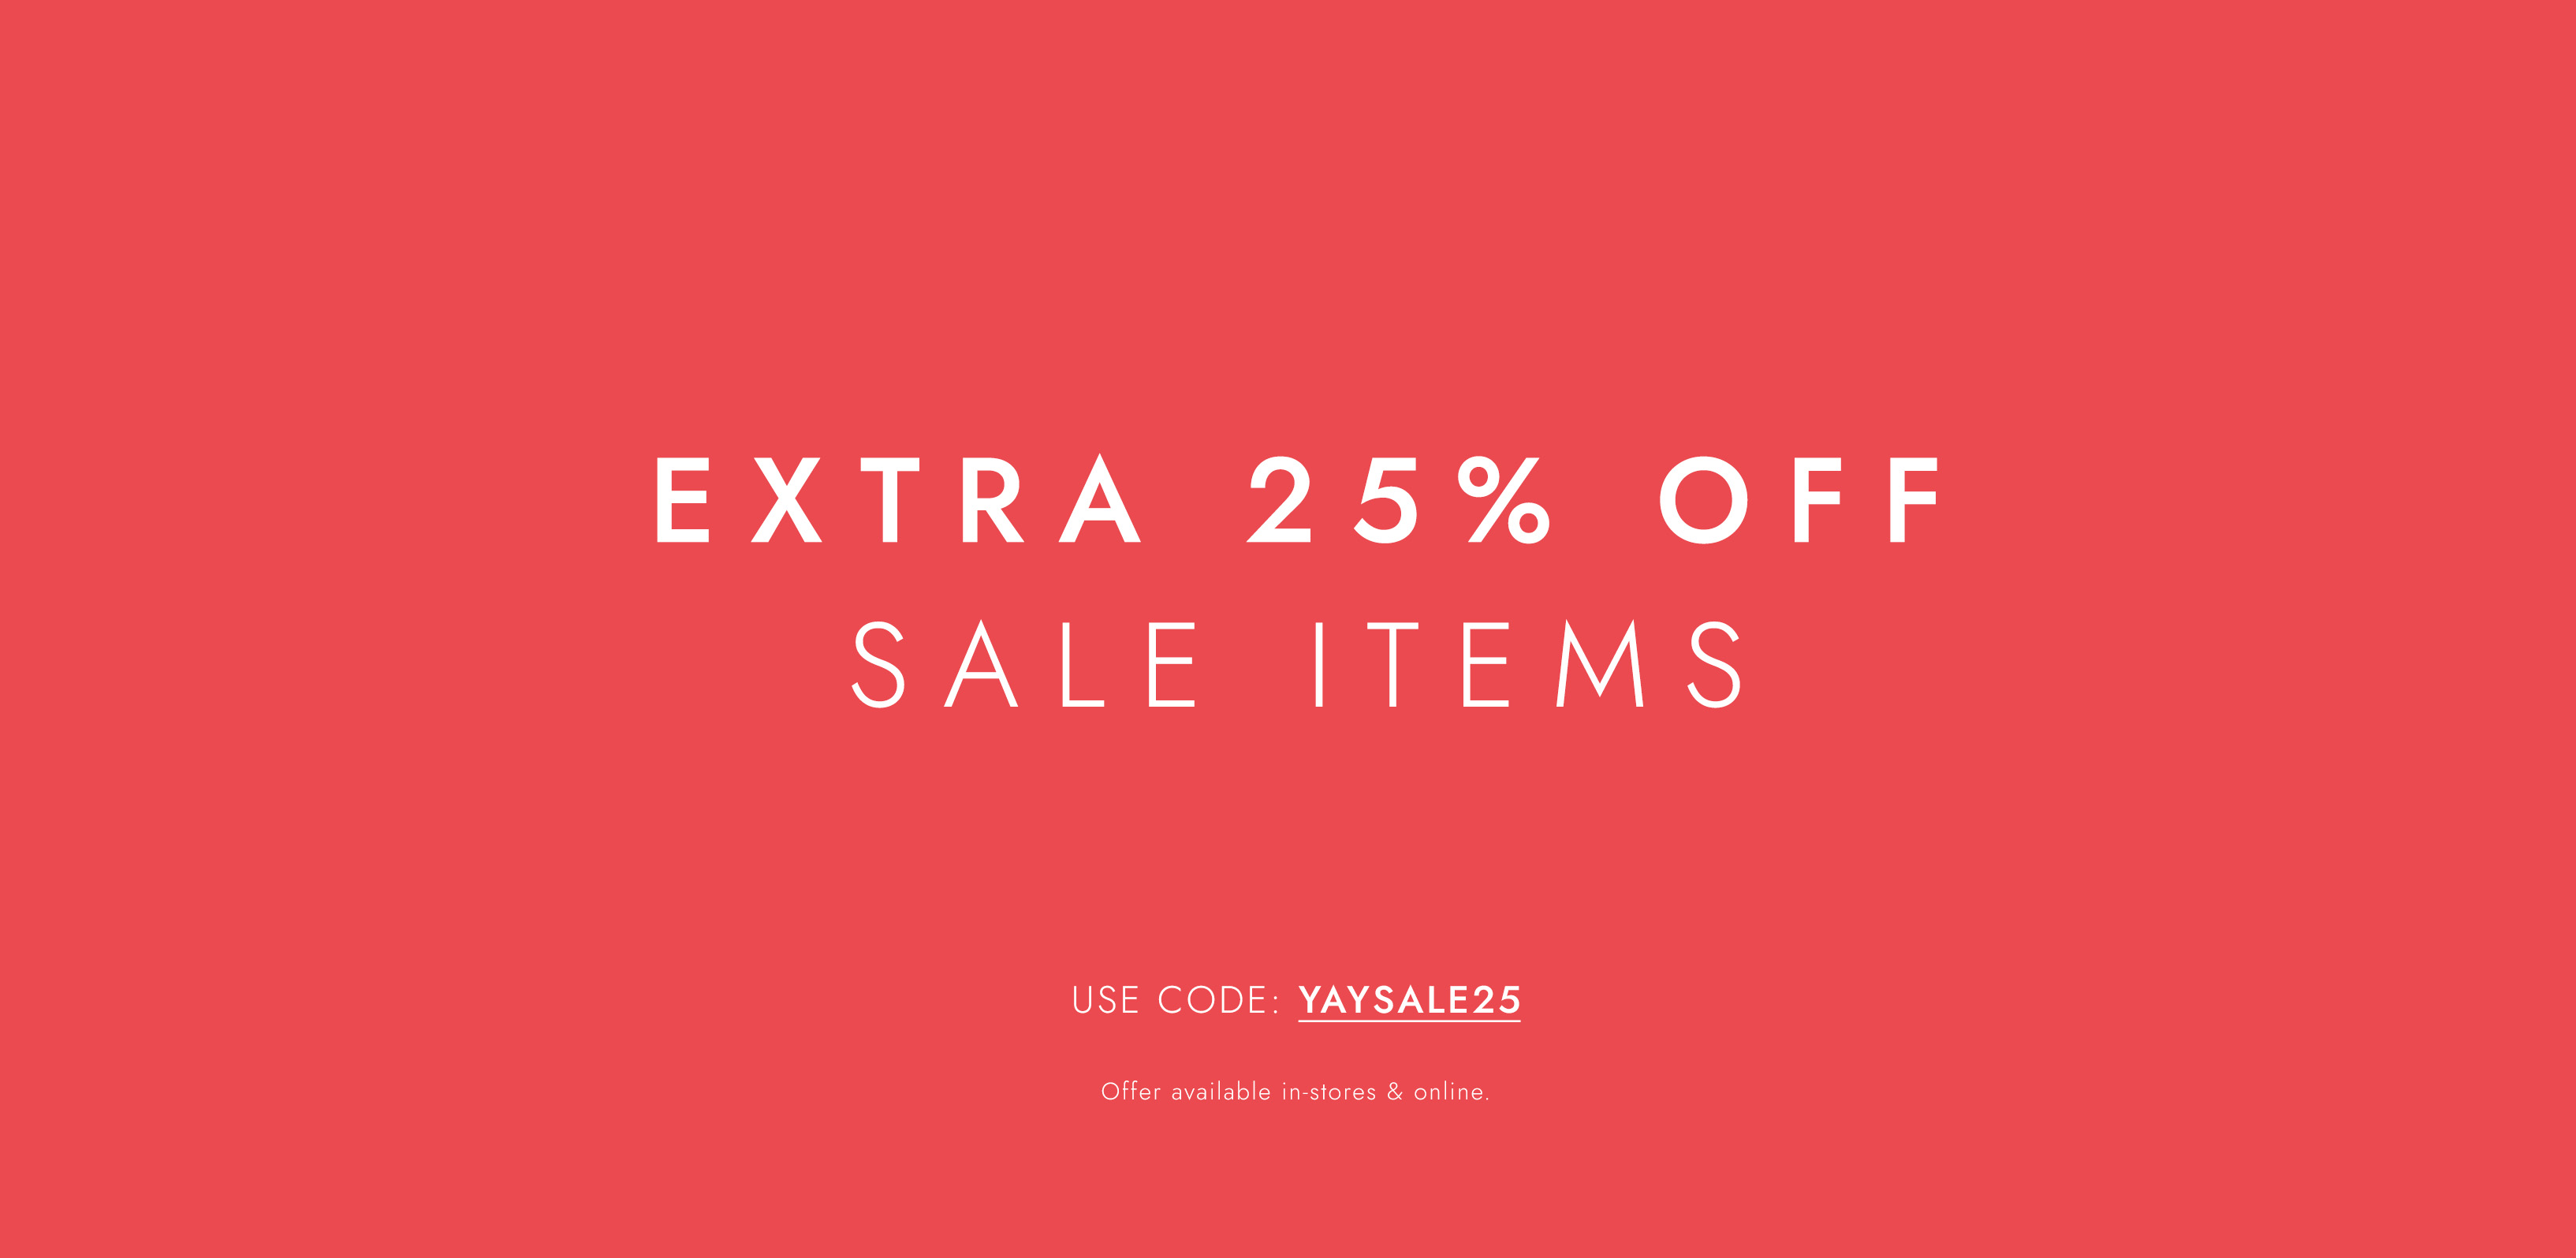 Extra 25% OFF sale items with promo code at Forcast